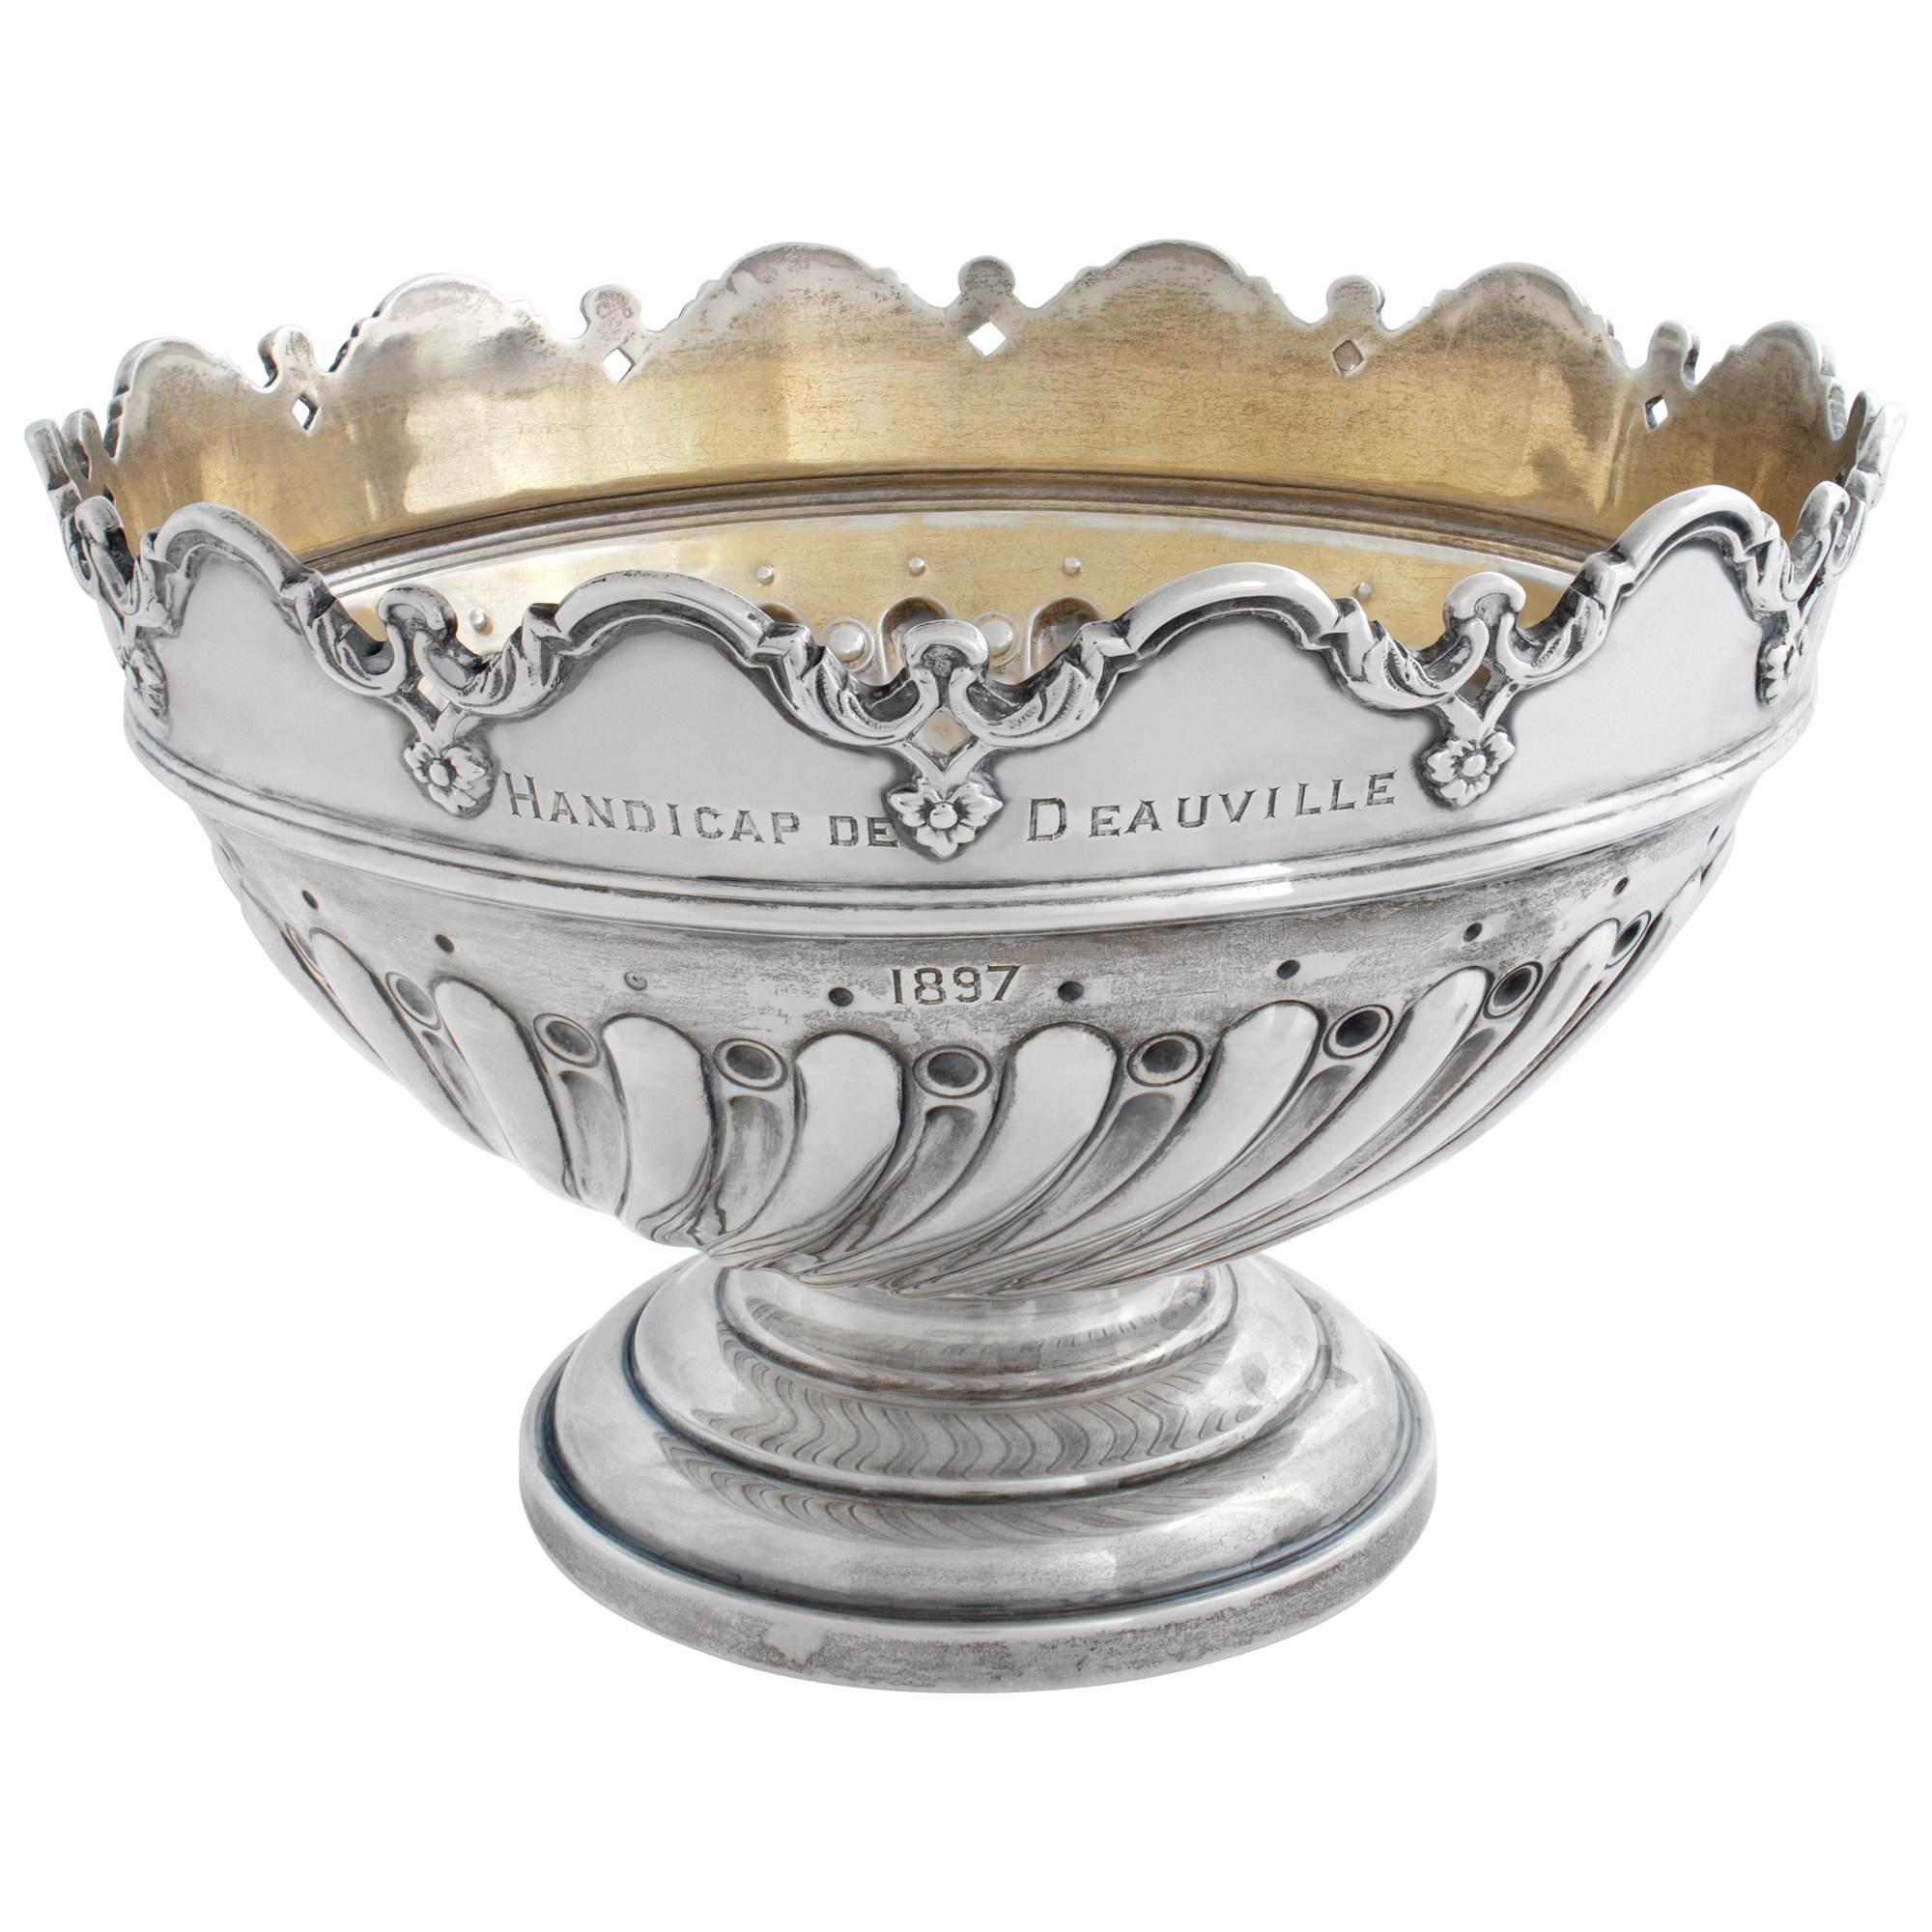 English London Sterling Silver Trophy, 1897. hand engraved "HANDICAP DE DEAUVILLE - 1897", over 12.37 ounce troy of .925 sertling silver image 1